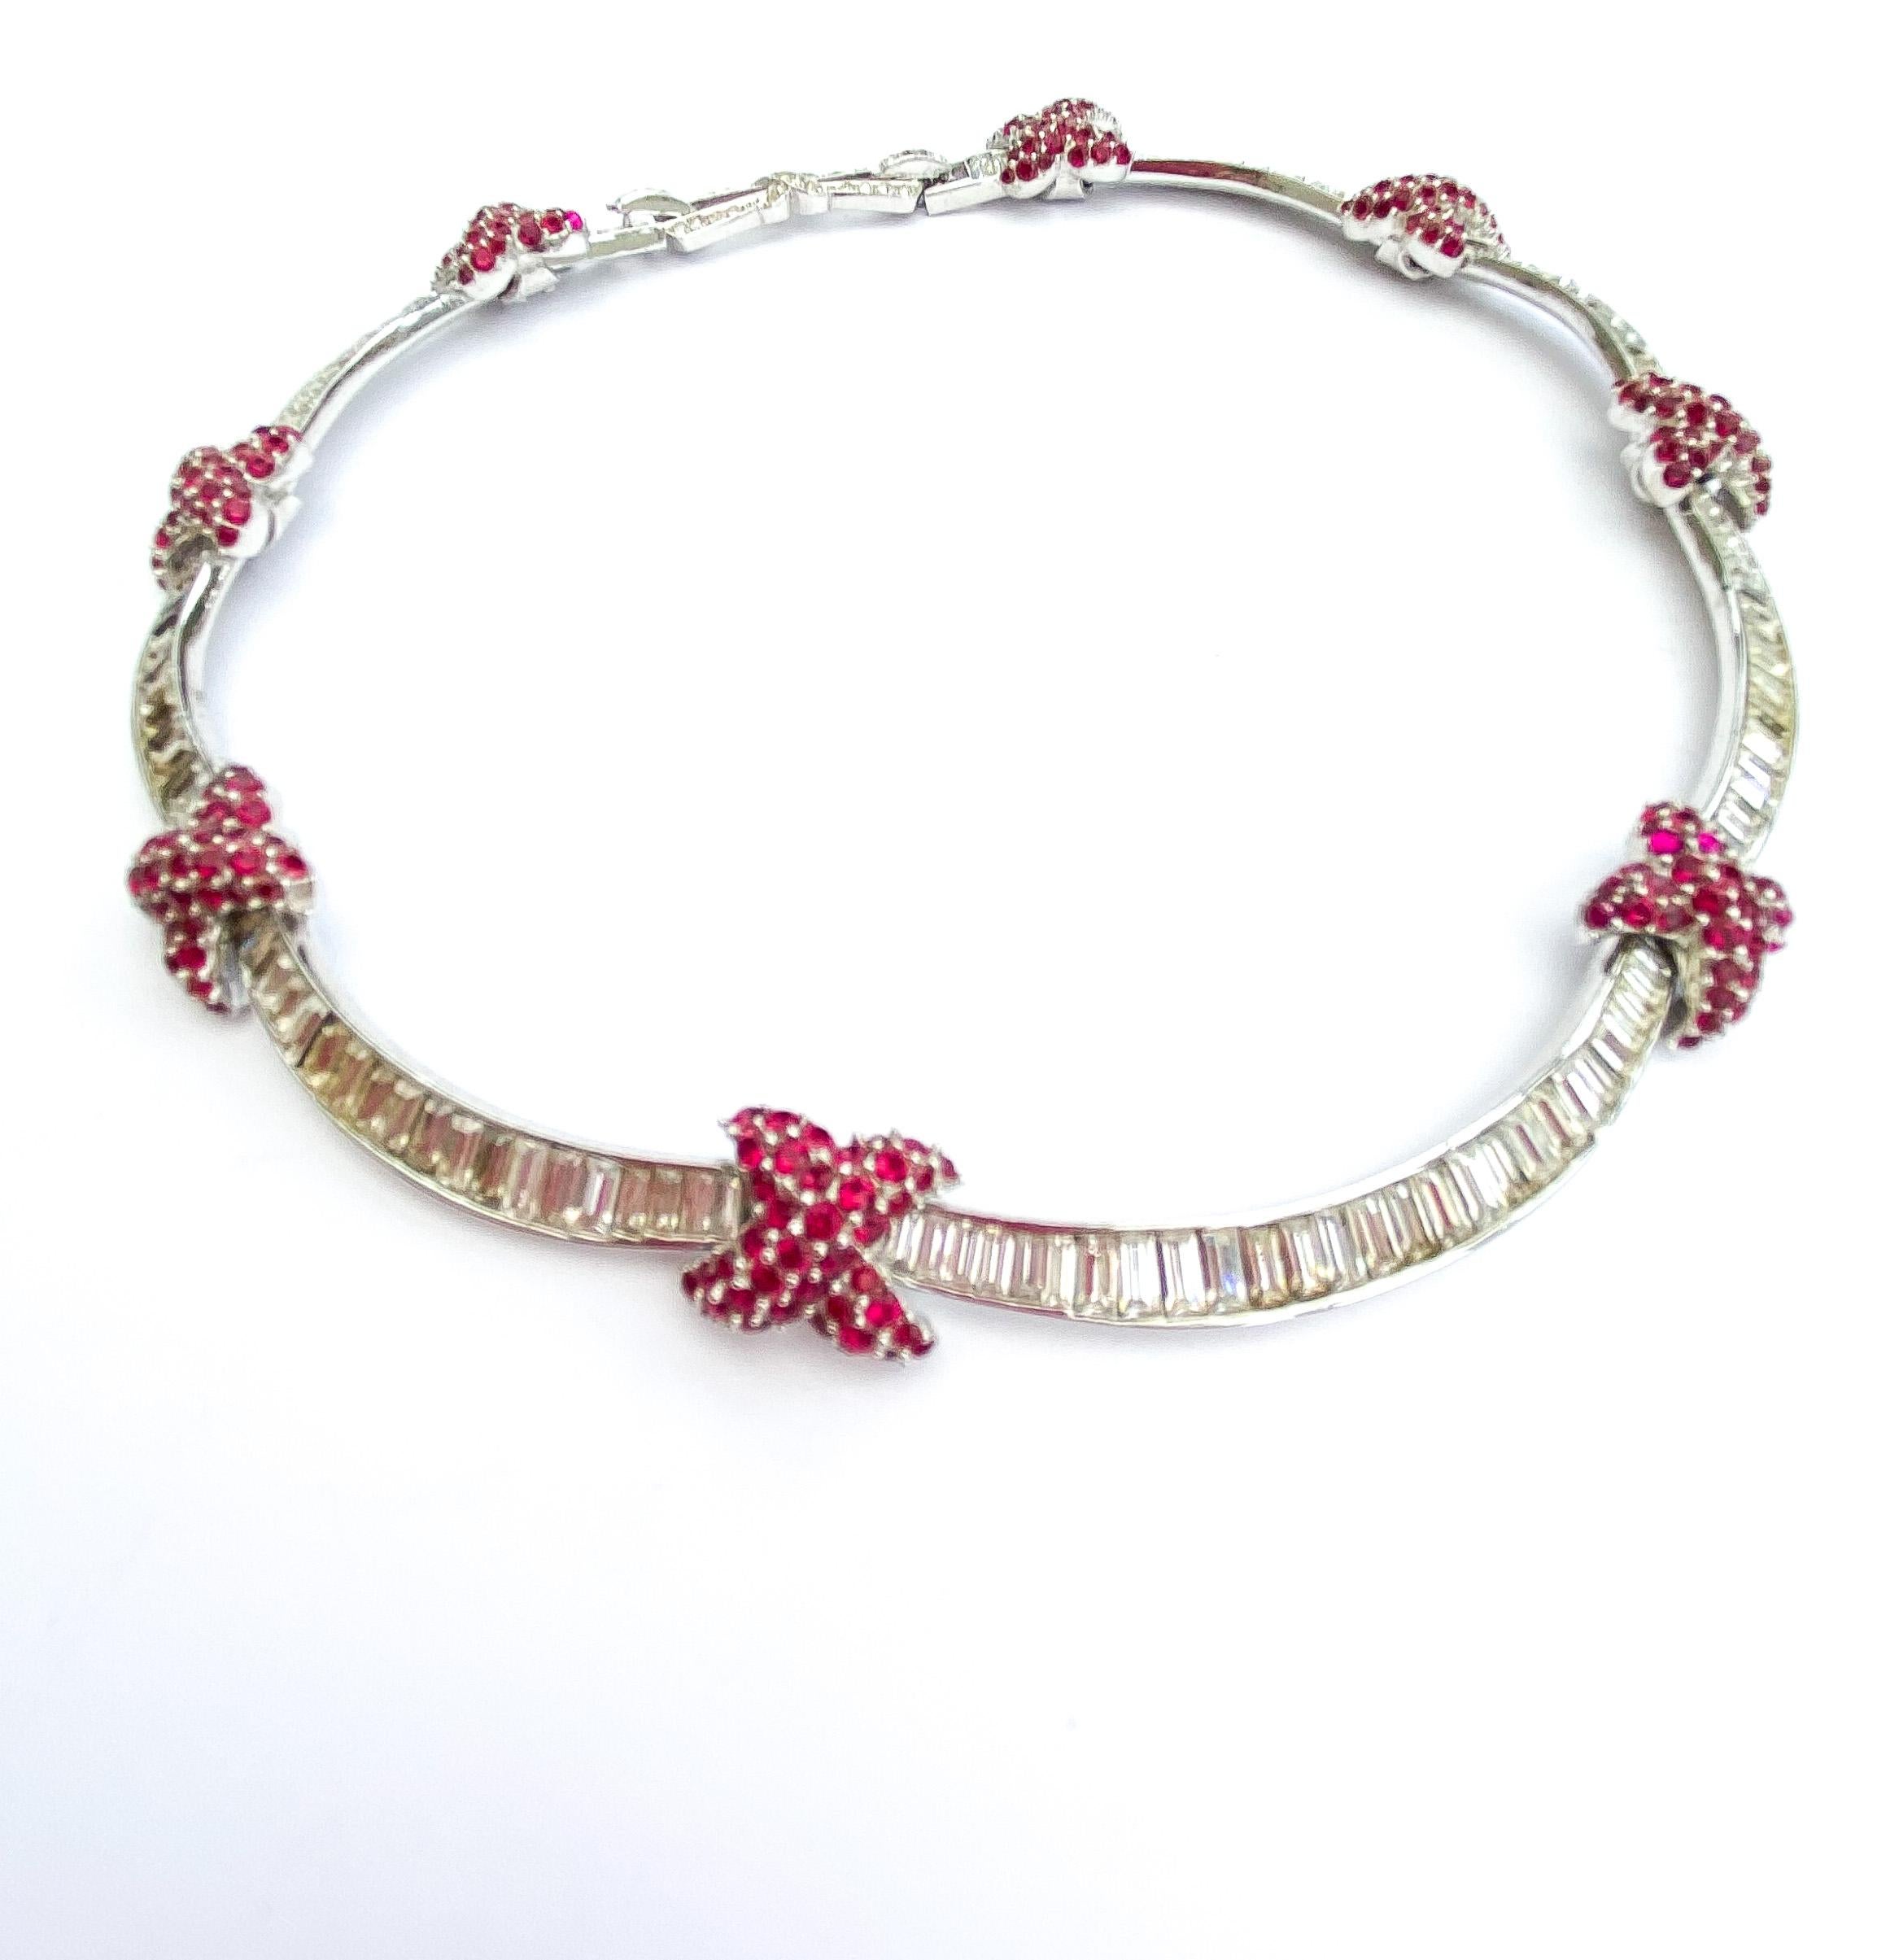 An exquisite and finely crafted ruby and clear paste necklace designed by Marcel Boucher in the 1960s. It has the unusual feature of a 'double clasp' at the back, the mid section in the form of a bow, the clasp allowing the wearer to shorten or